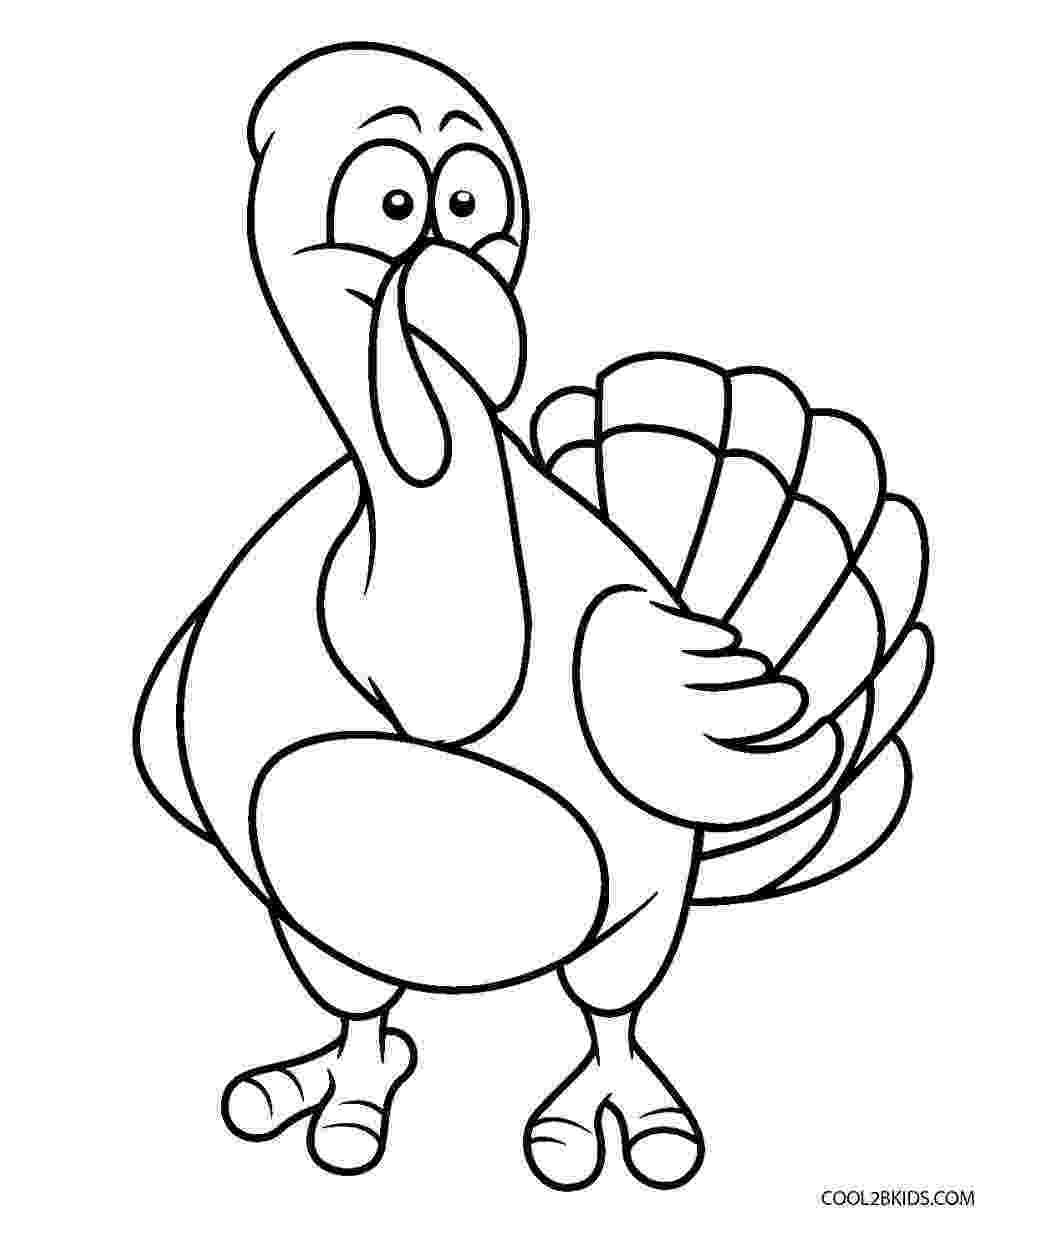 free turkey coloring pages 16 free thanksgiving coloring pages for kids toddlers turkey coloring pages free 